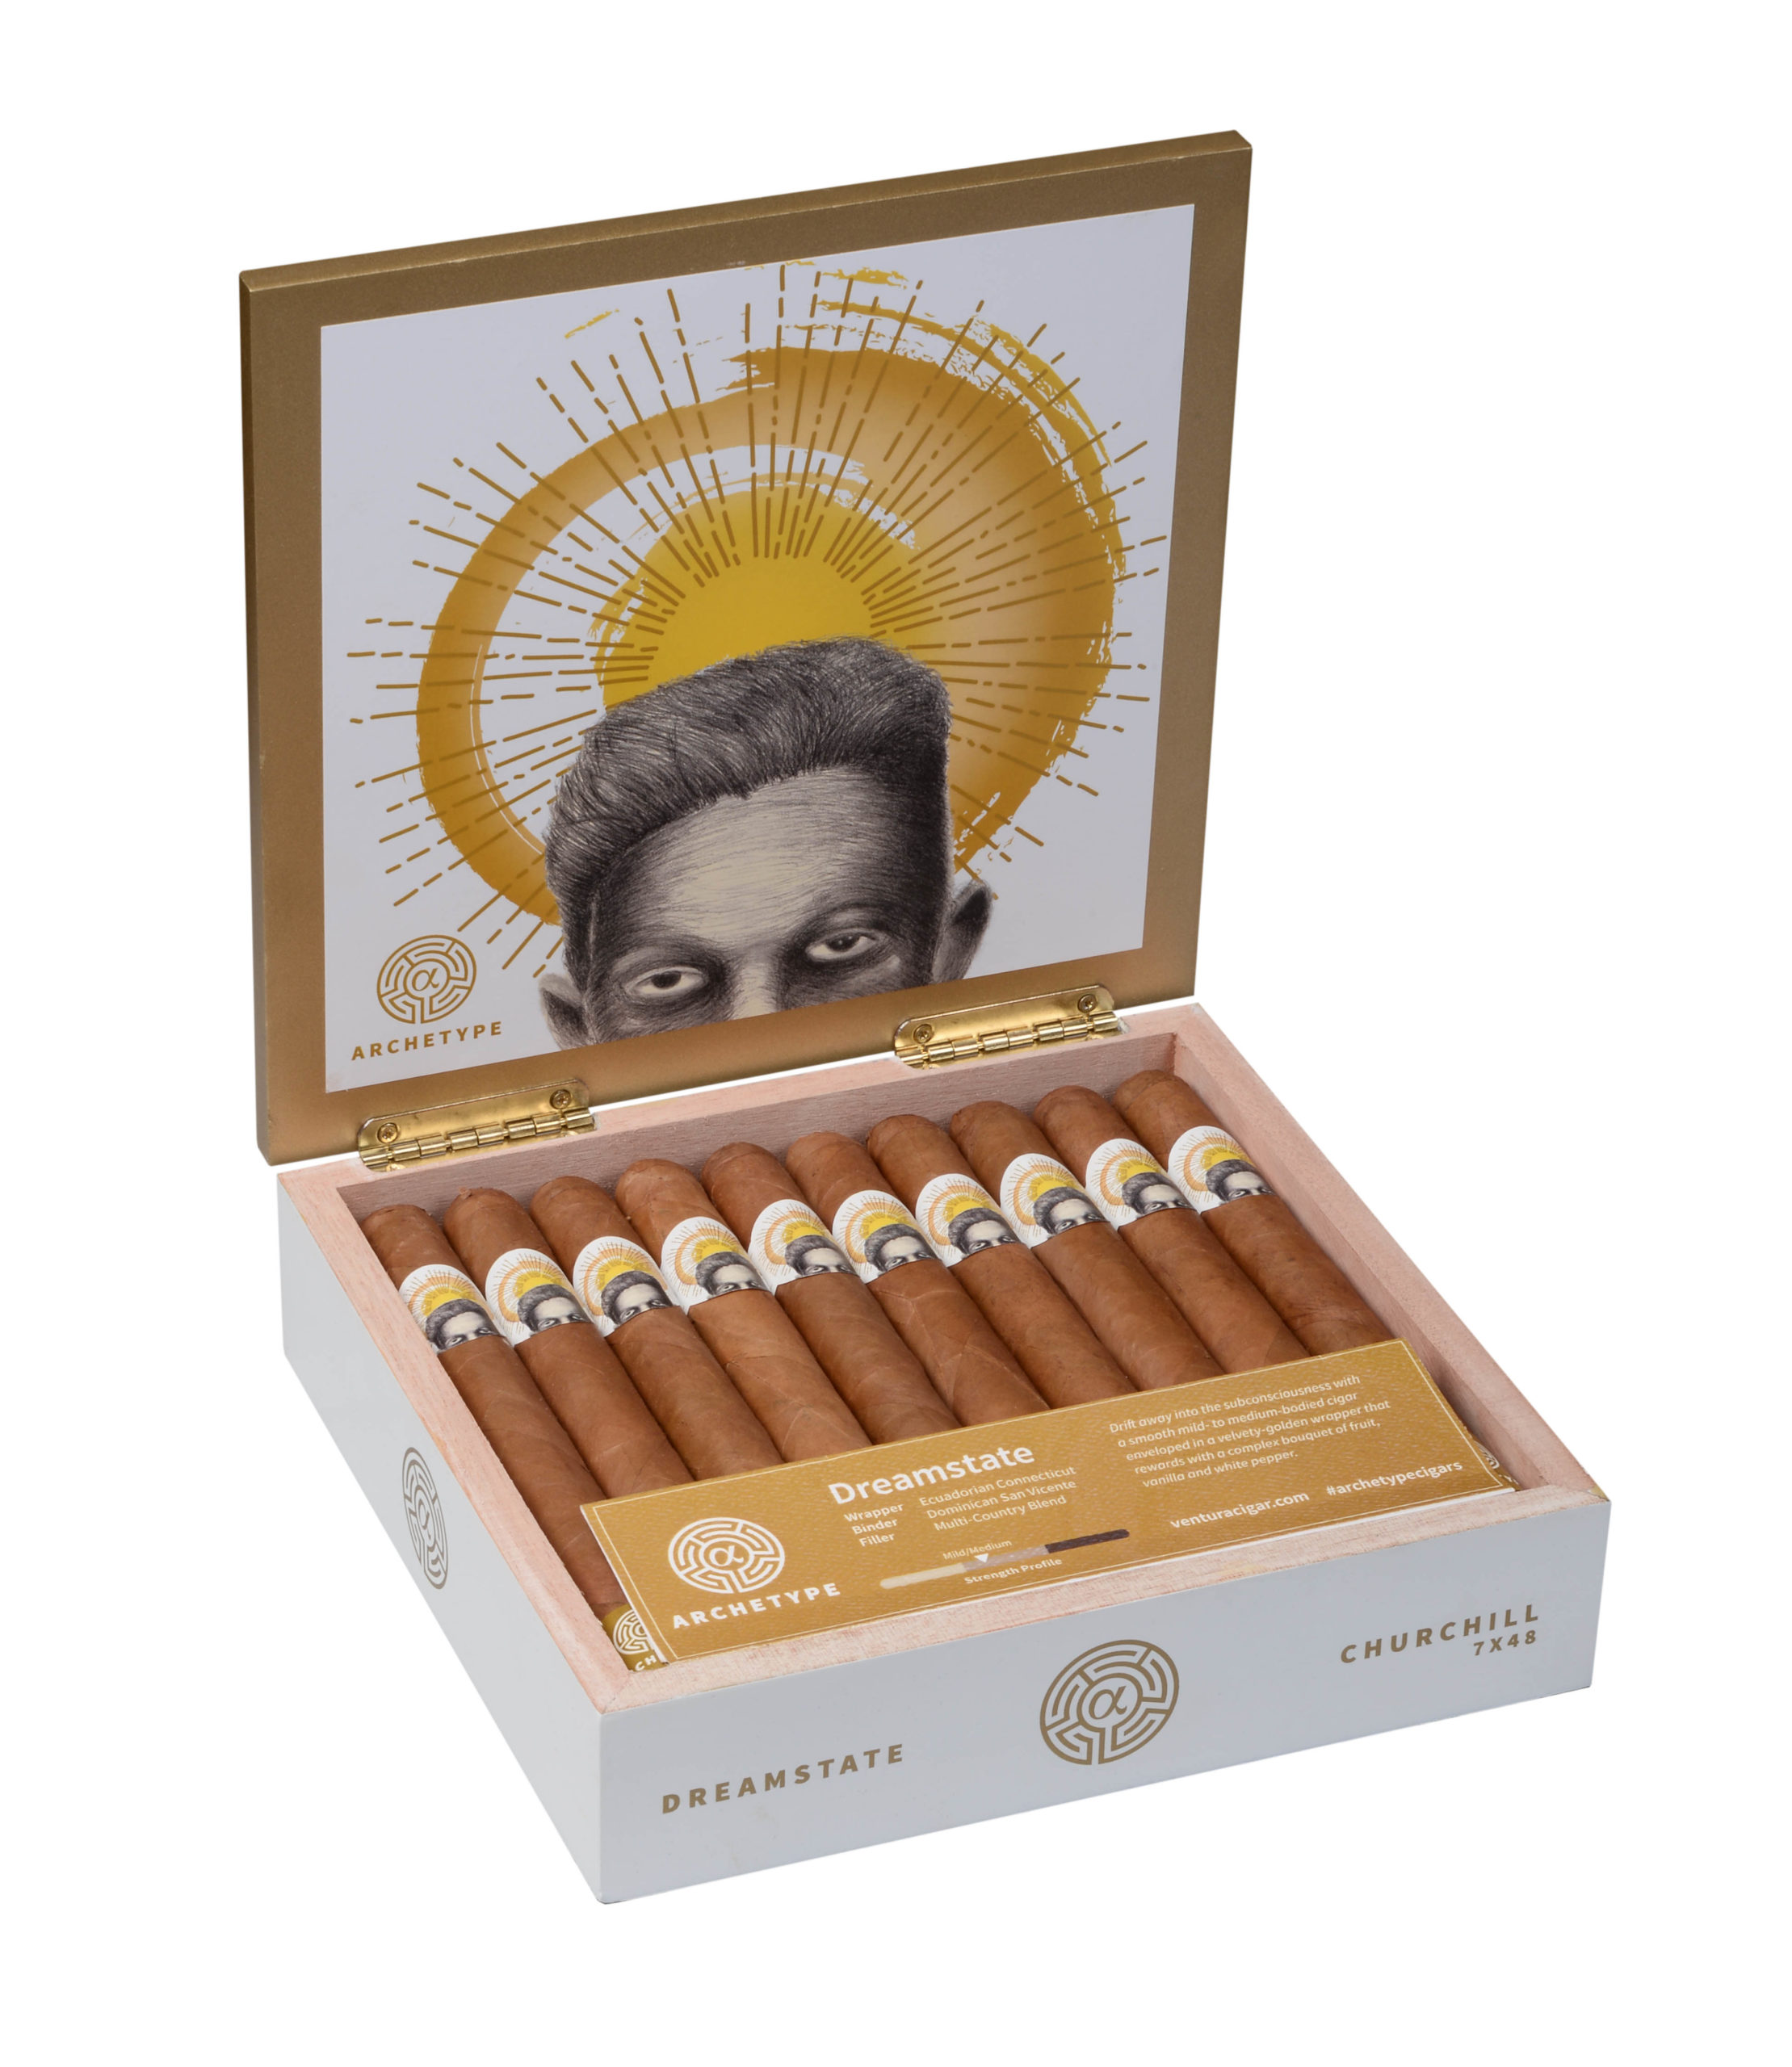 Archetype Dreamstate Cigar Review   Cigars.com